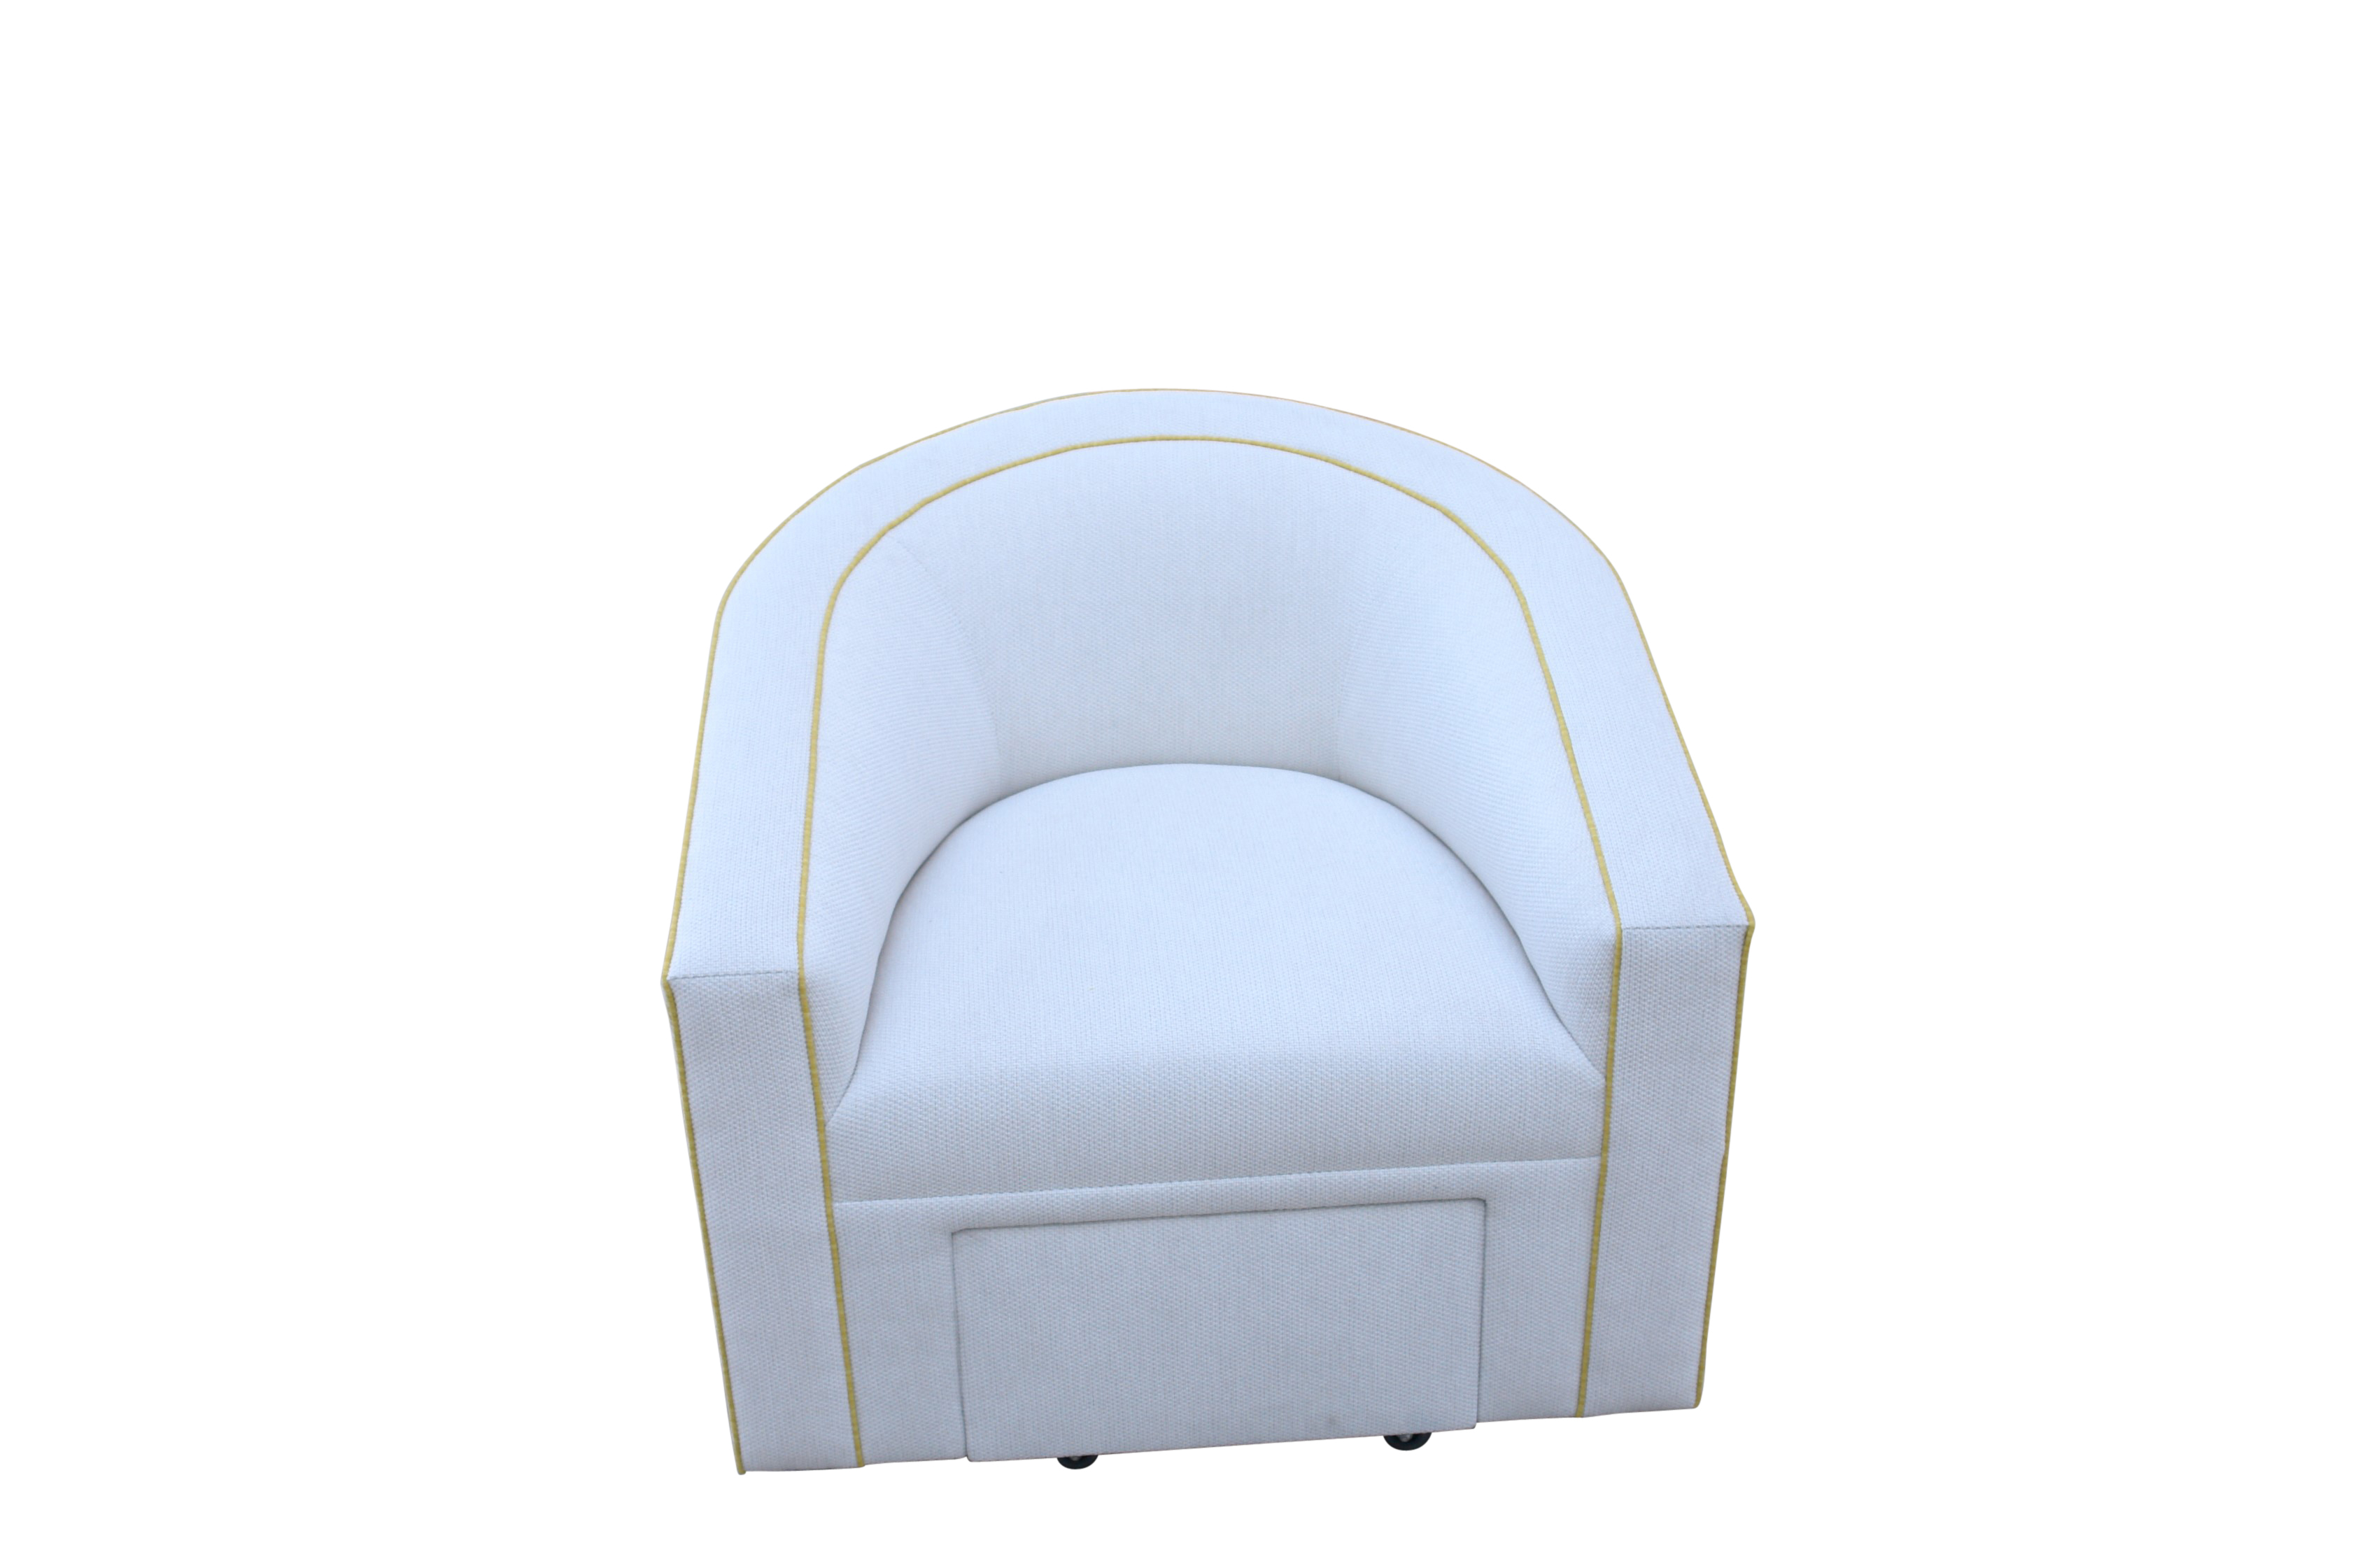 Curved Swivel Chair with Footrest, Catalog